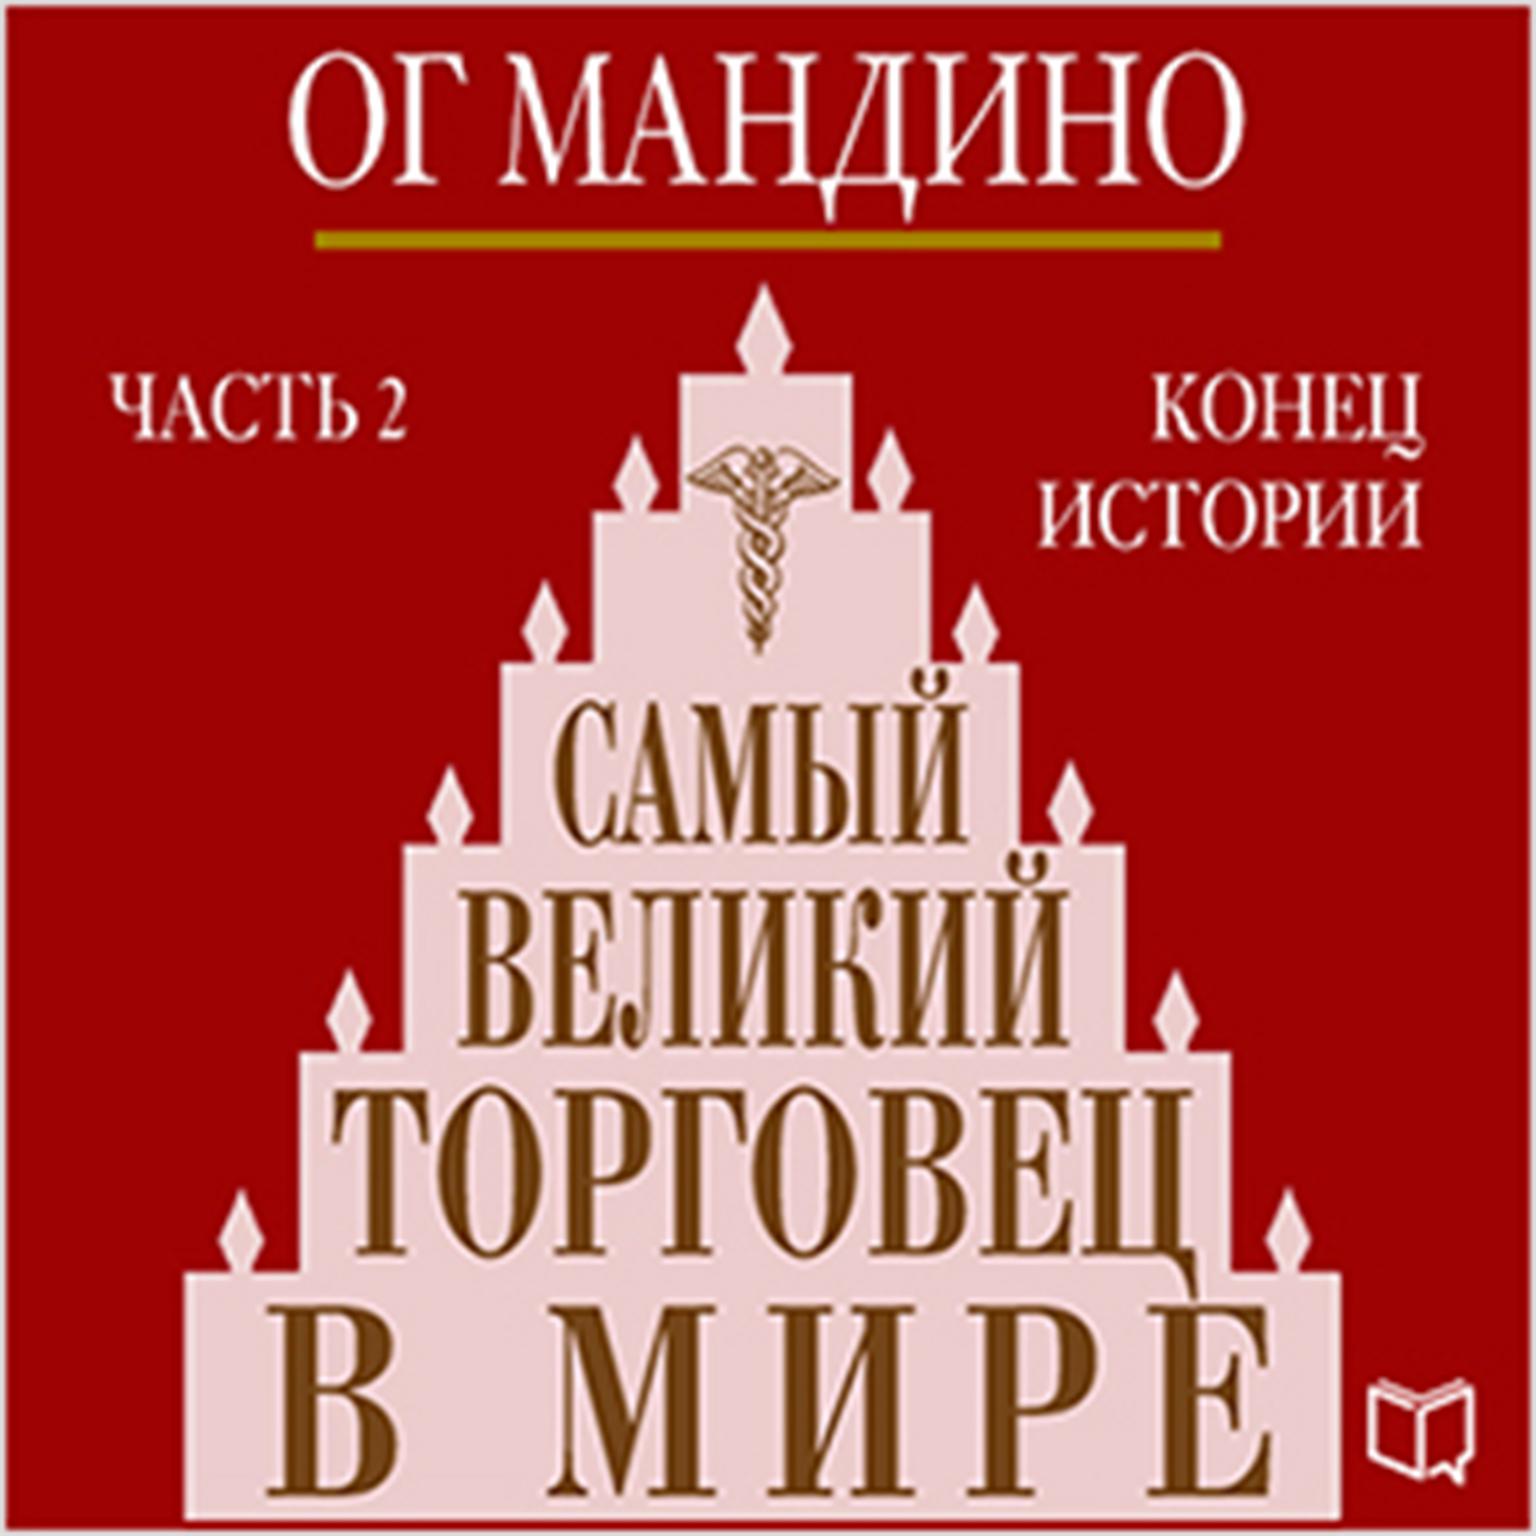 The Greatest Salesman in the World (Part 2) [Russian Edition]: The End of the Story Audiobook, by Og Mandino